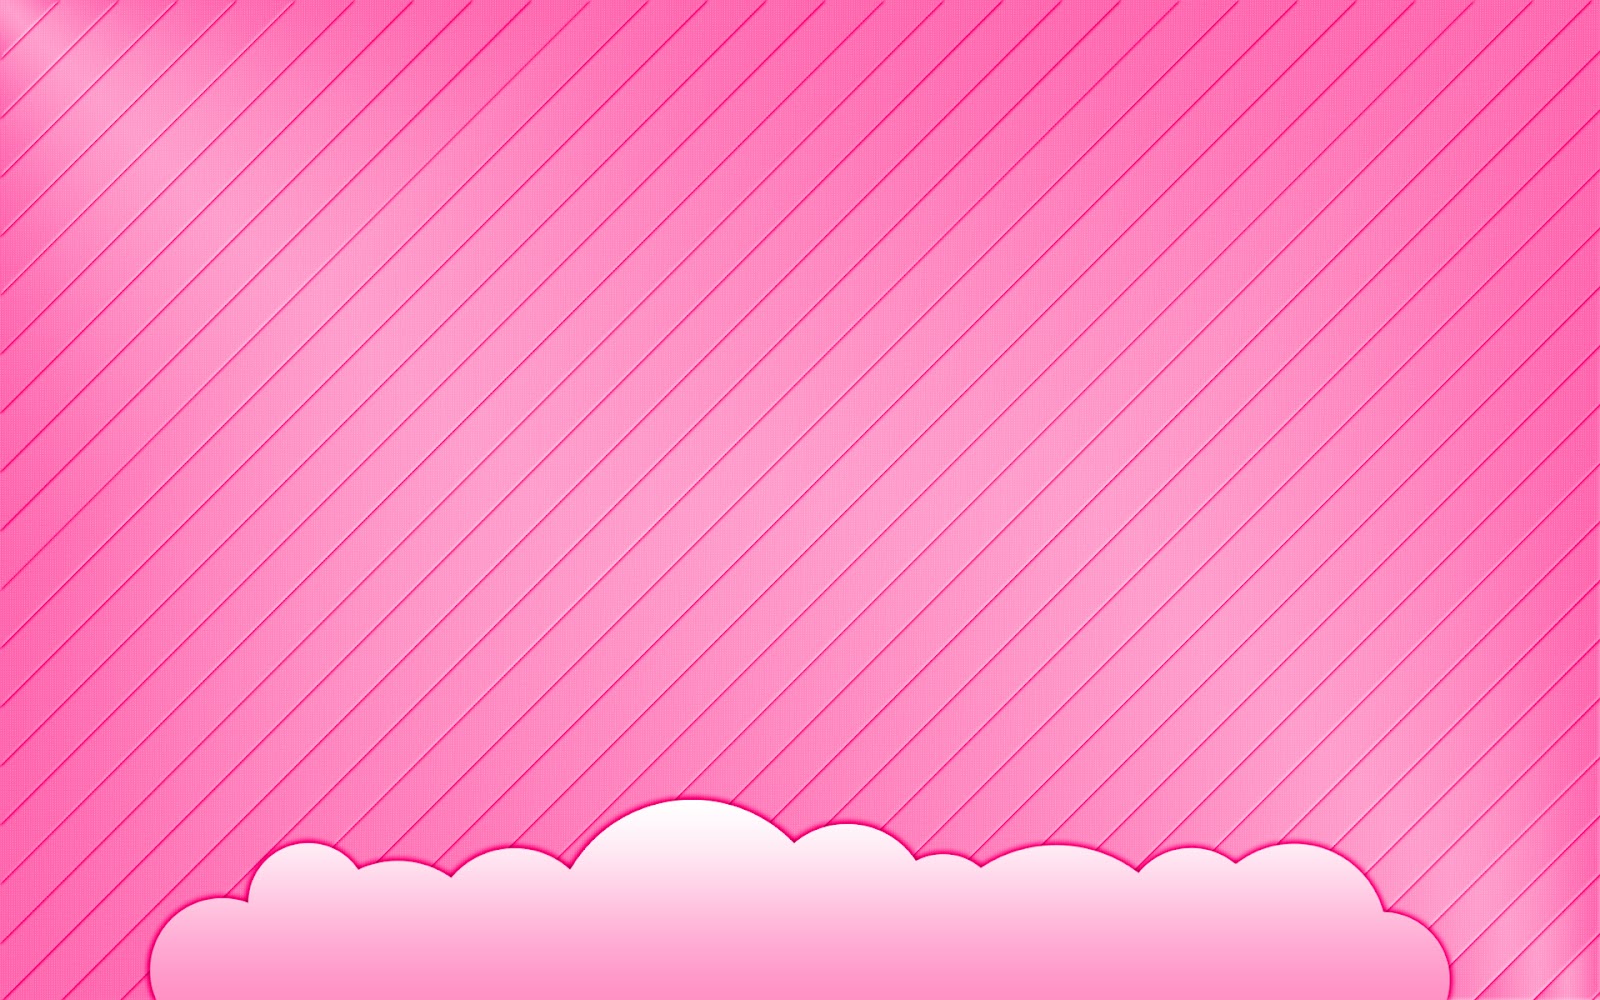 Abstract Pink Background with Clouds